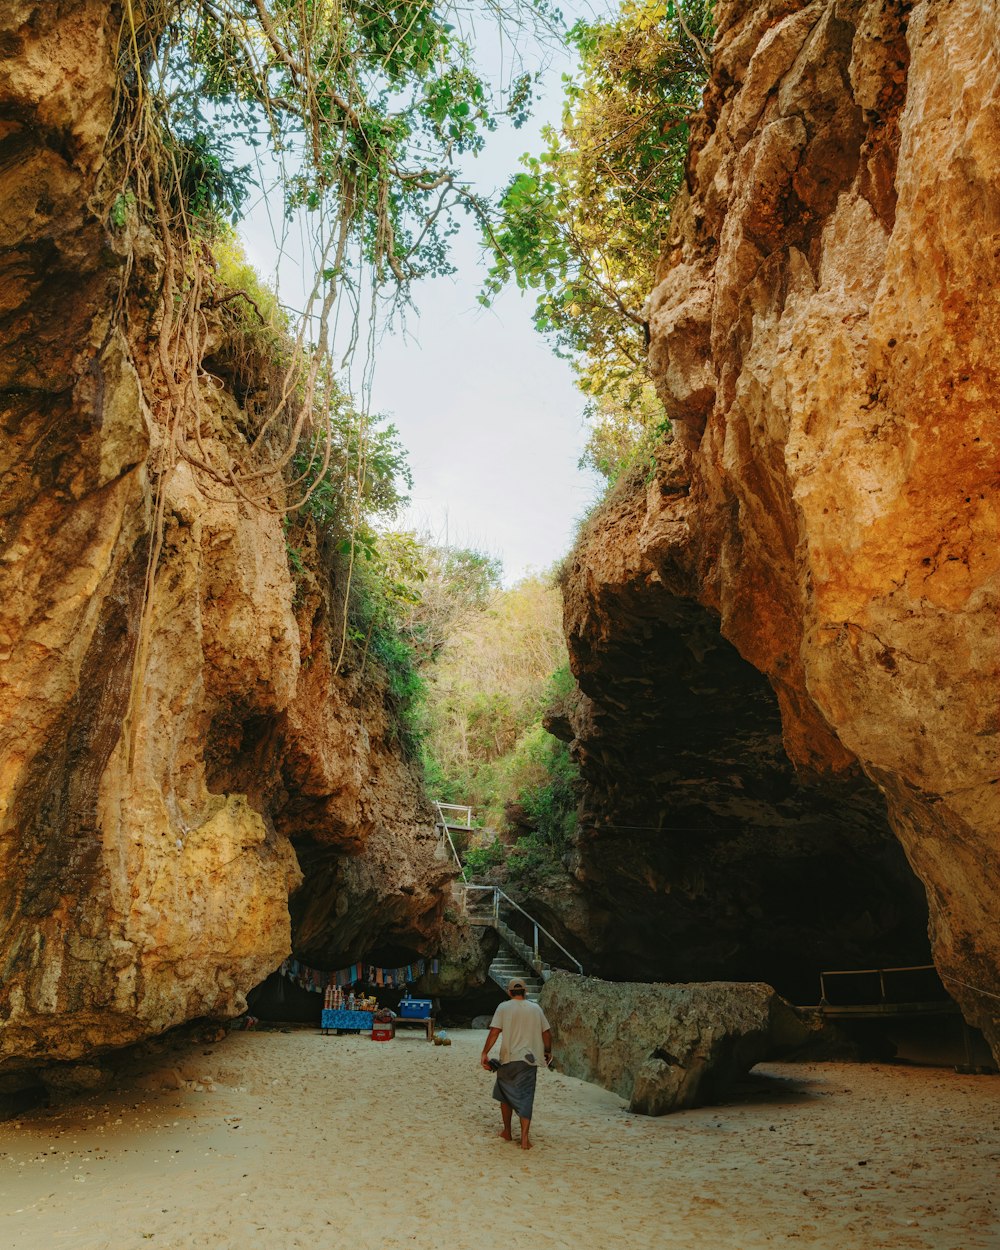 a man walking through a cave filled with trees